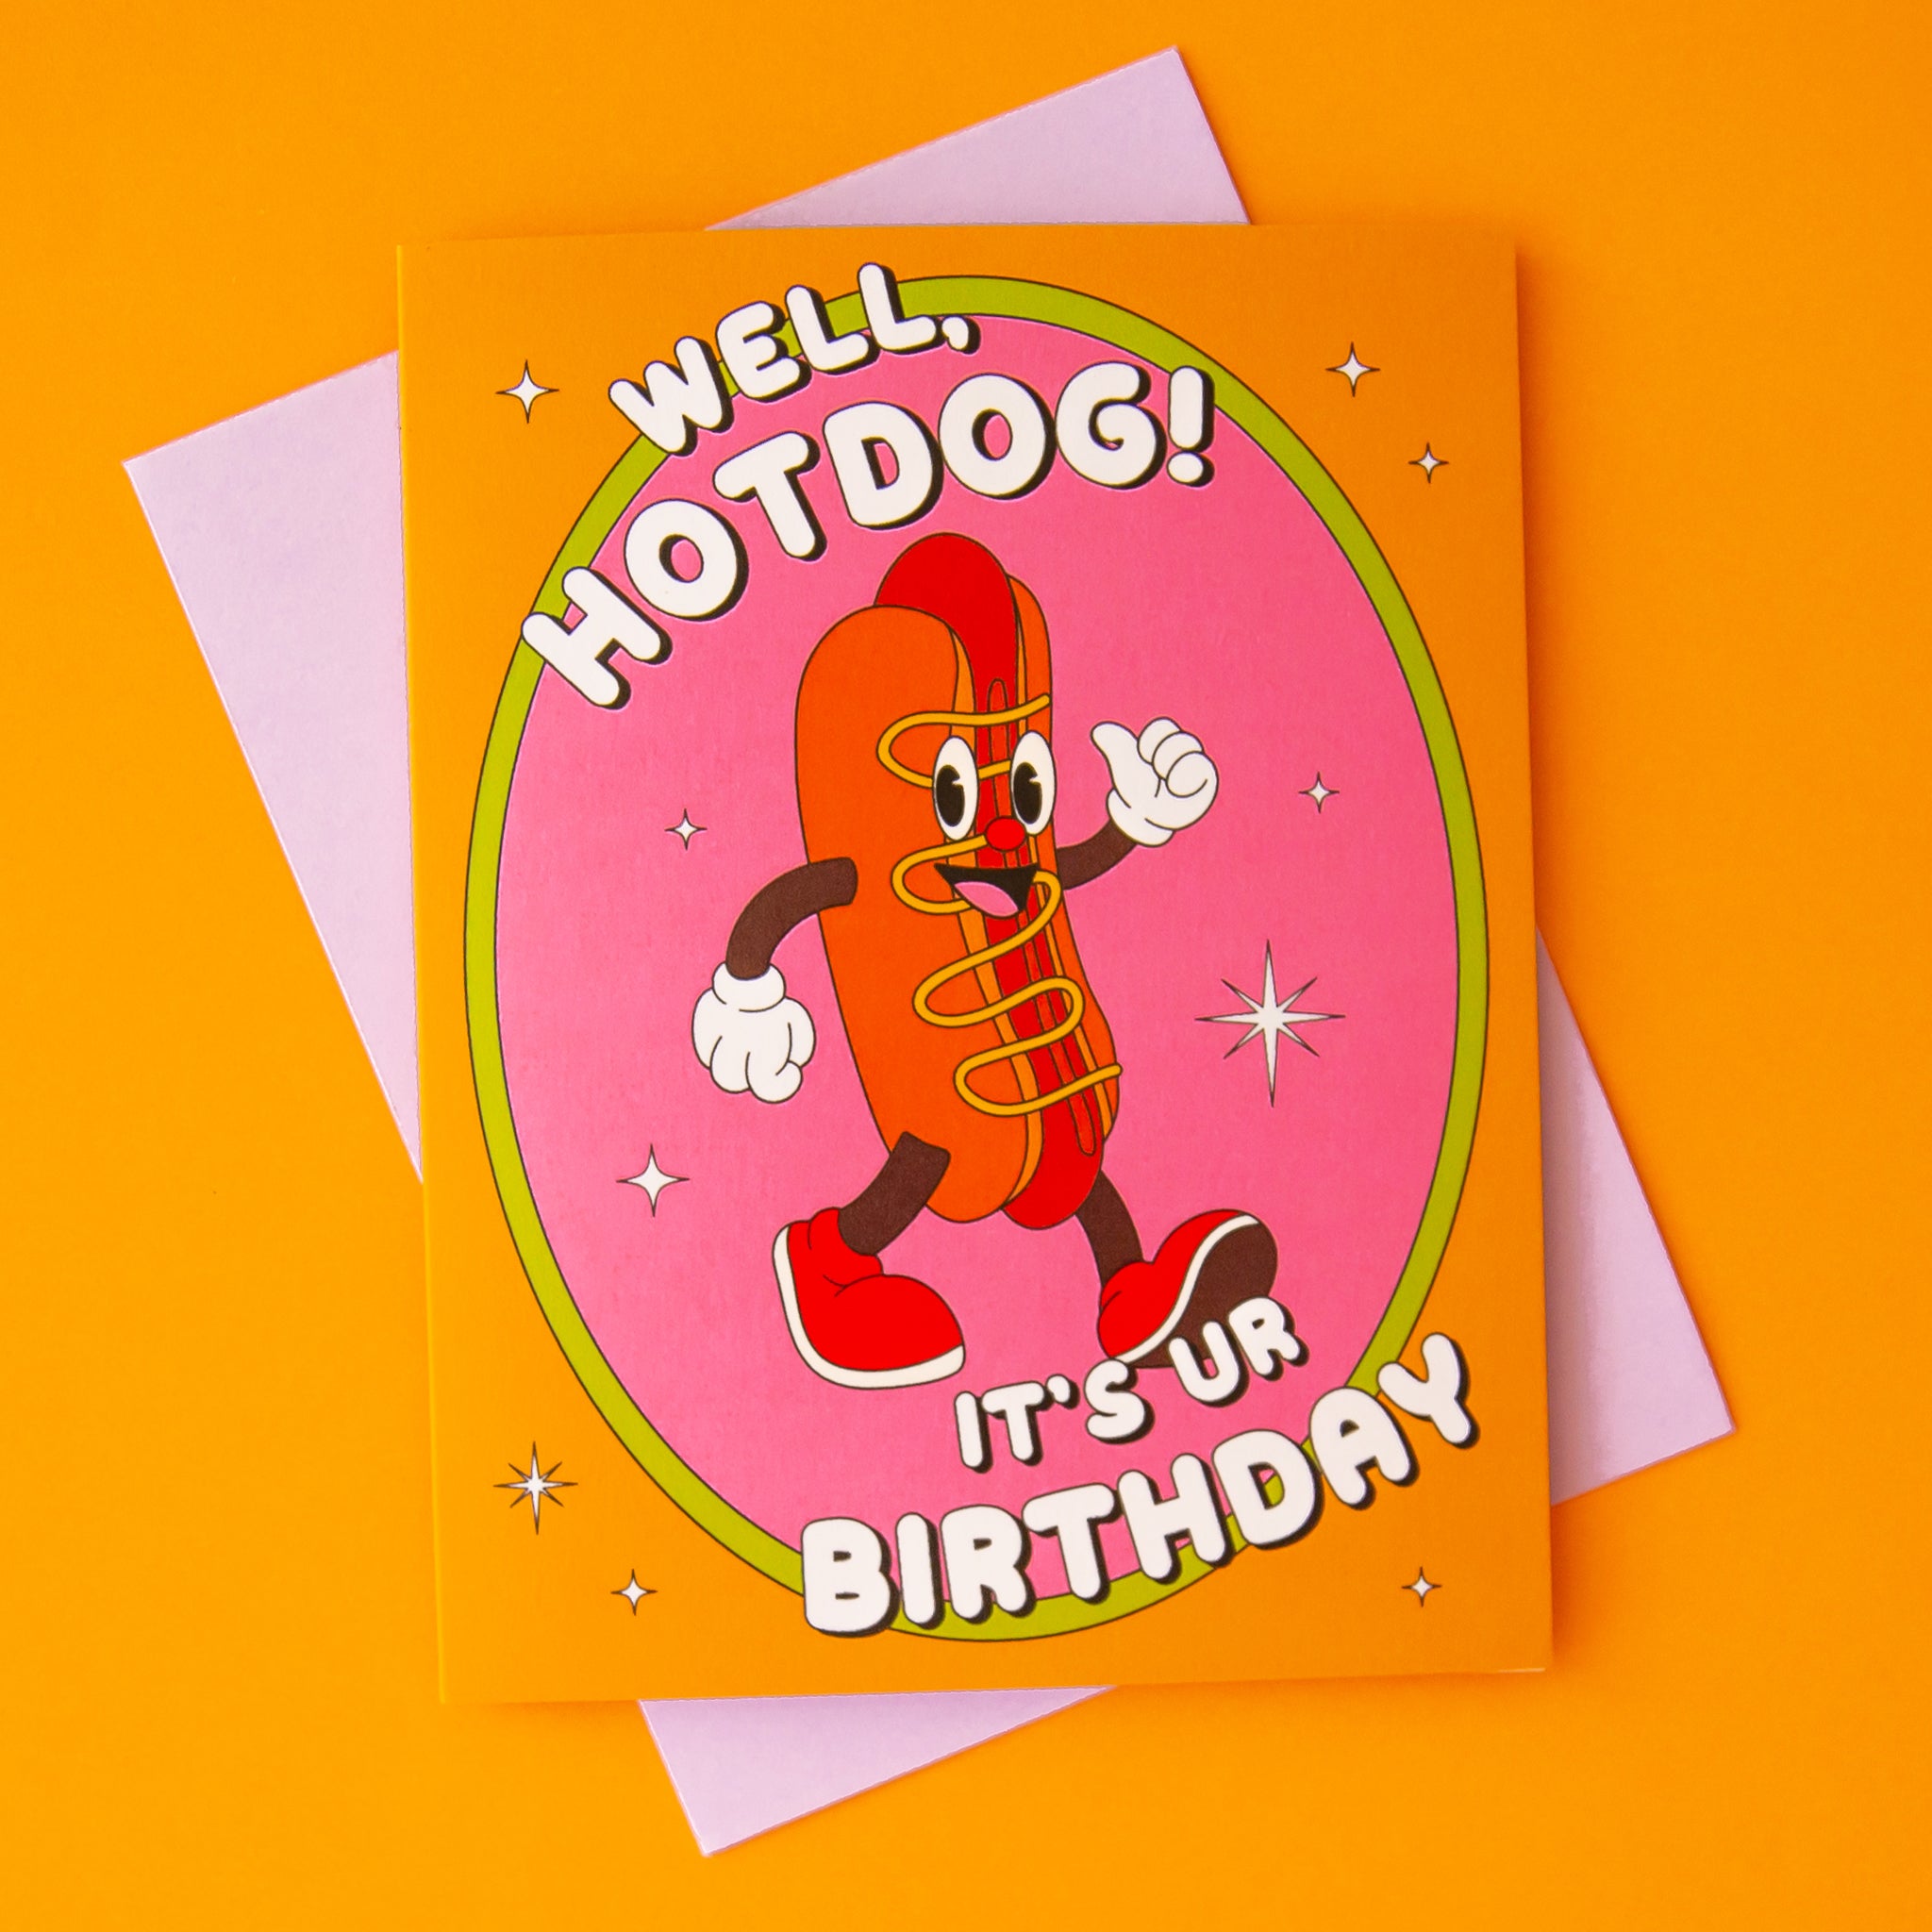 On an orange background is an orange and pink card with an illustration of a smiley face hot dog with text above and below that reads, "Well, Hotdog! It's Ur Birthday". 